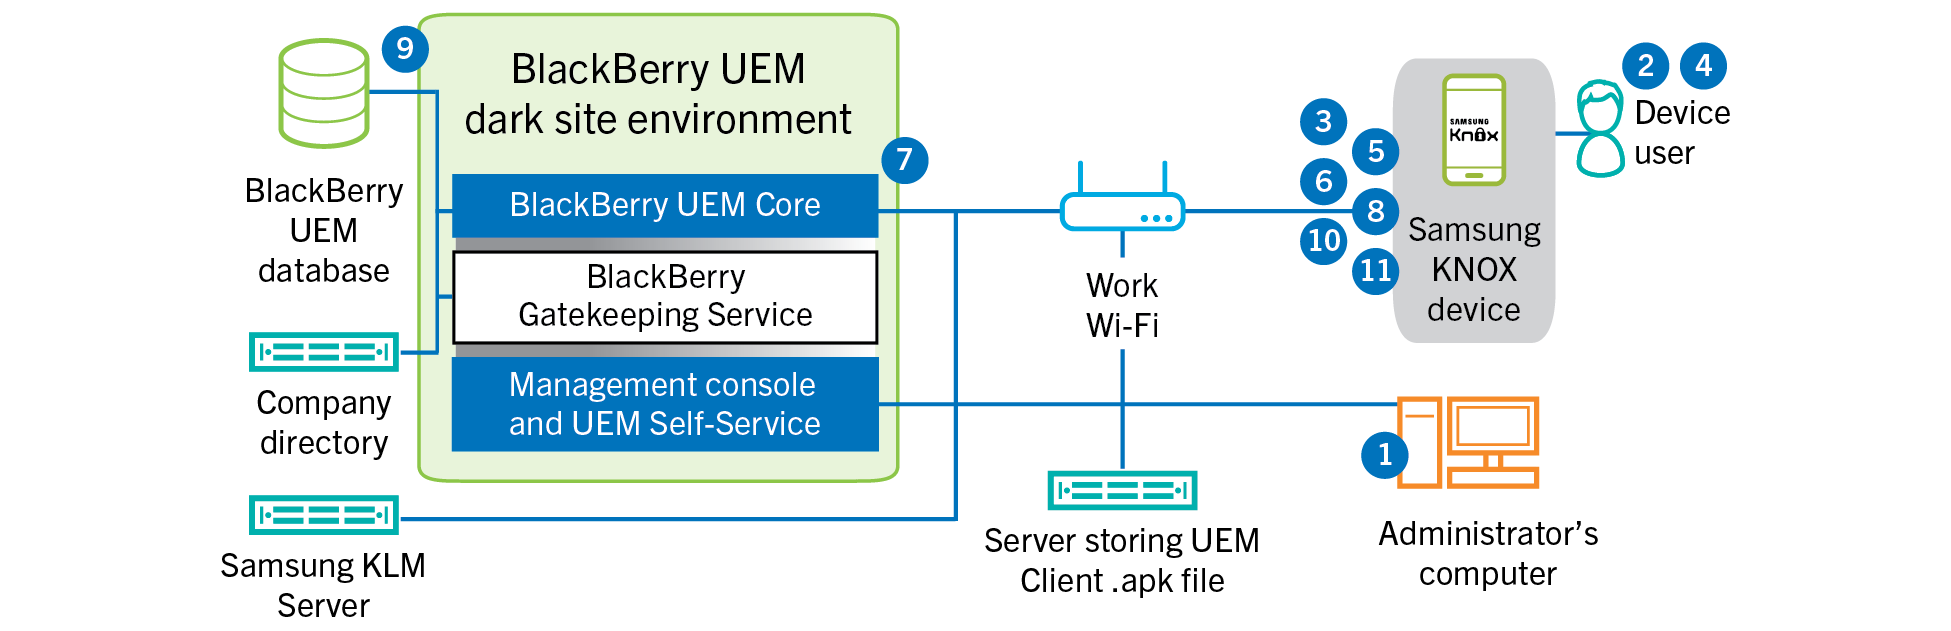 Diagram showing the steps and the BlackBerry UEM components used when activating a Samsung Knox Workspace device in a dark site environment.